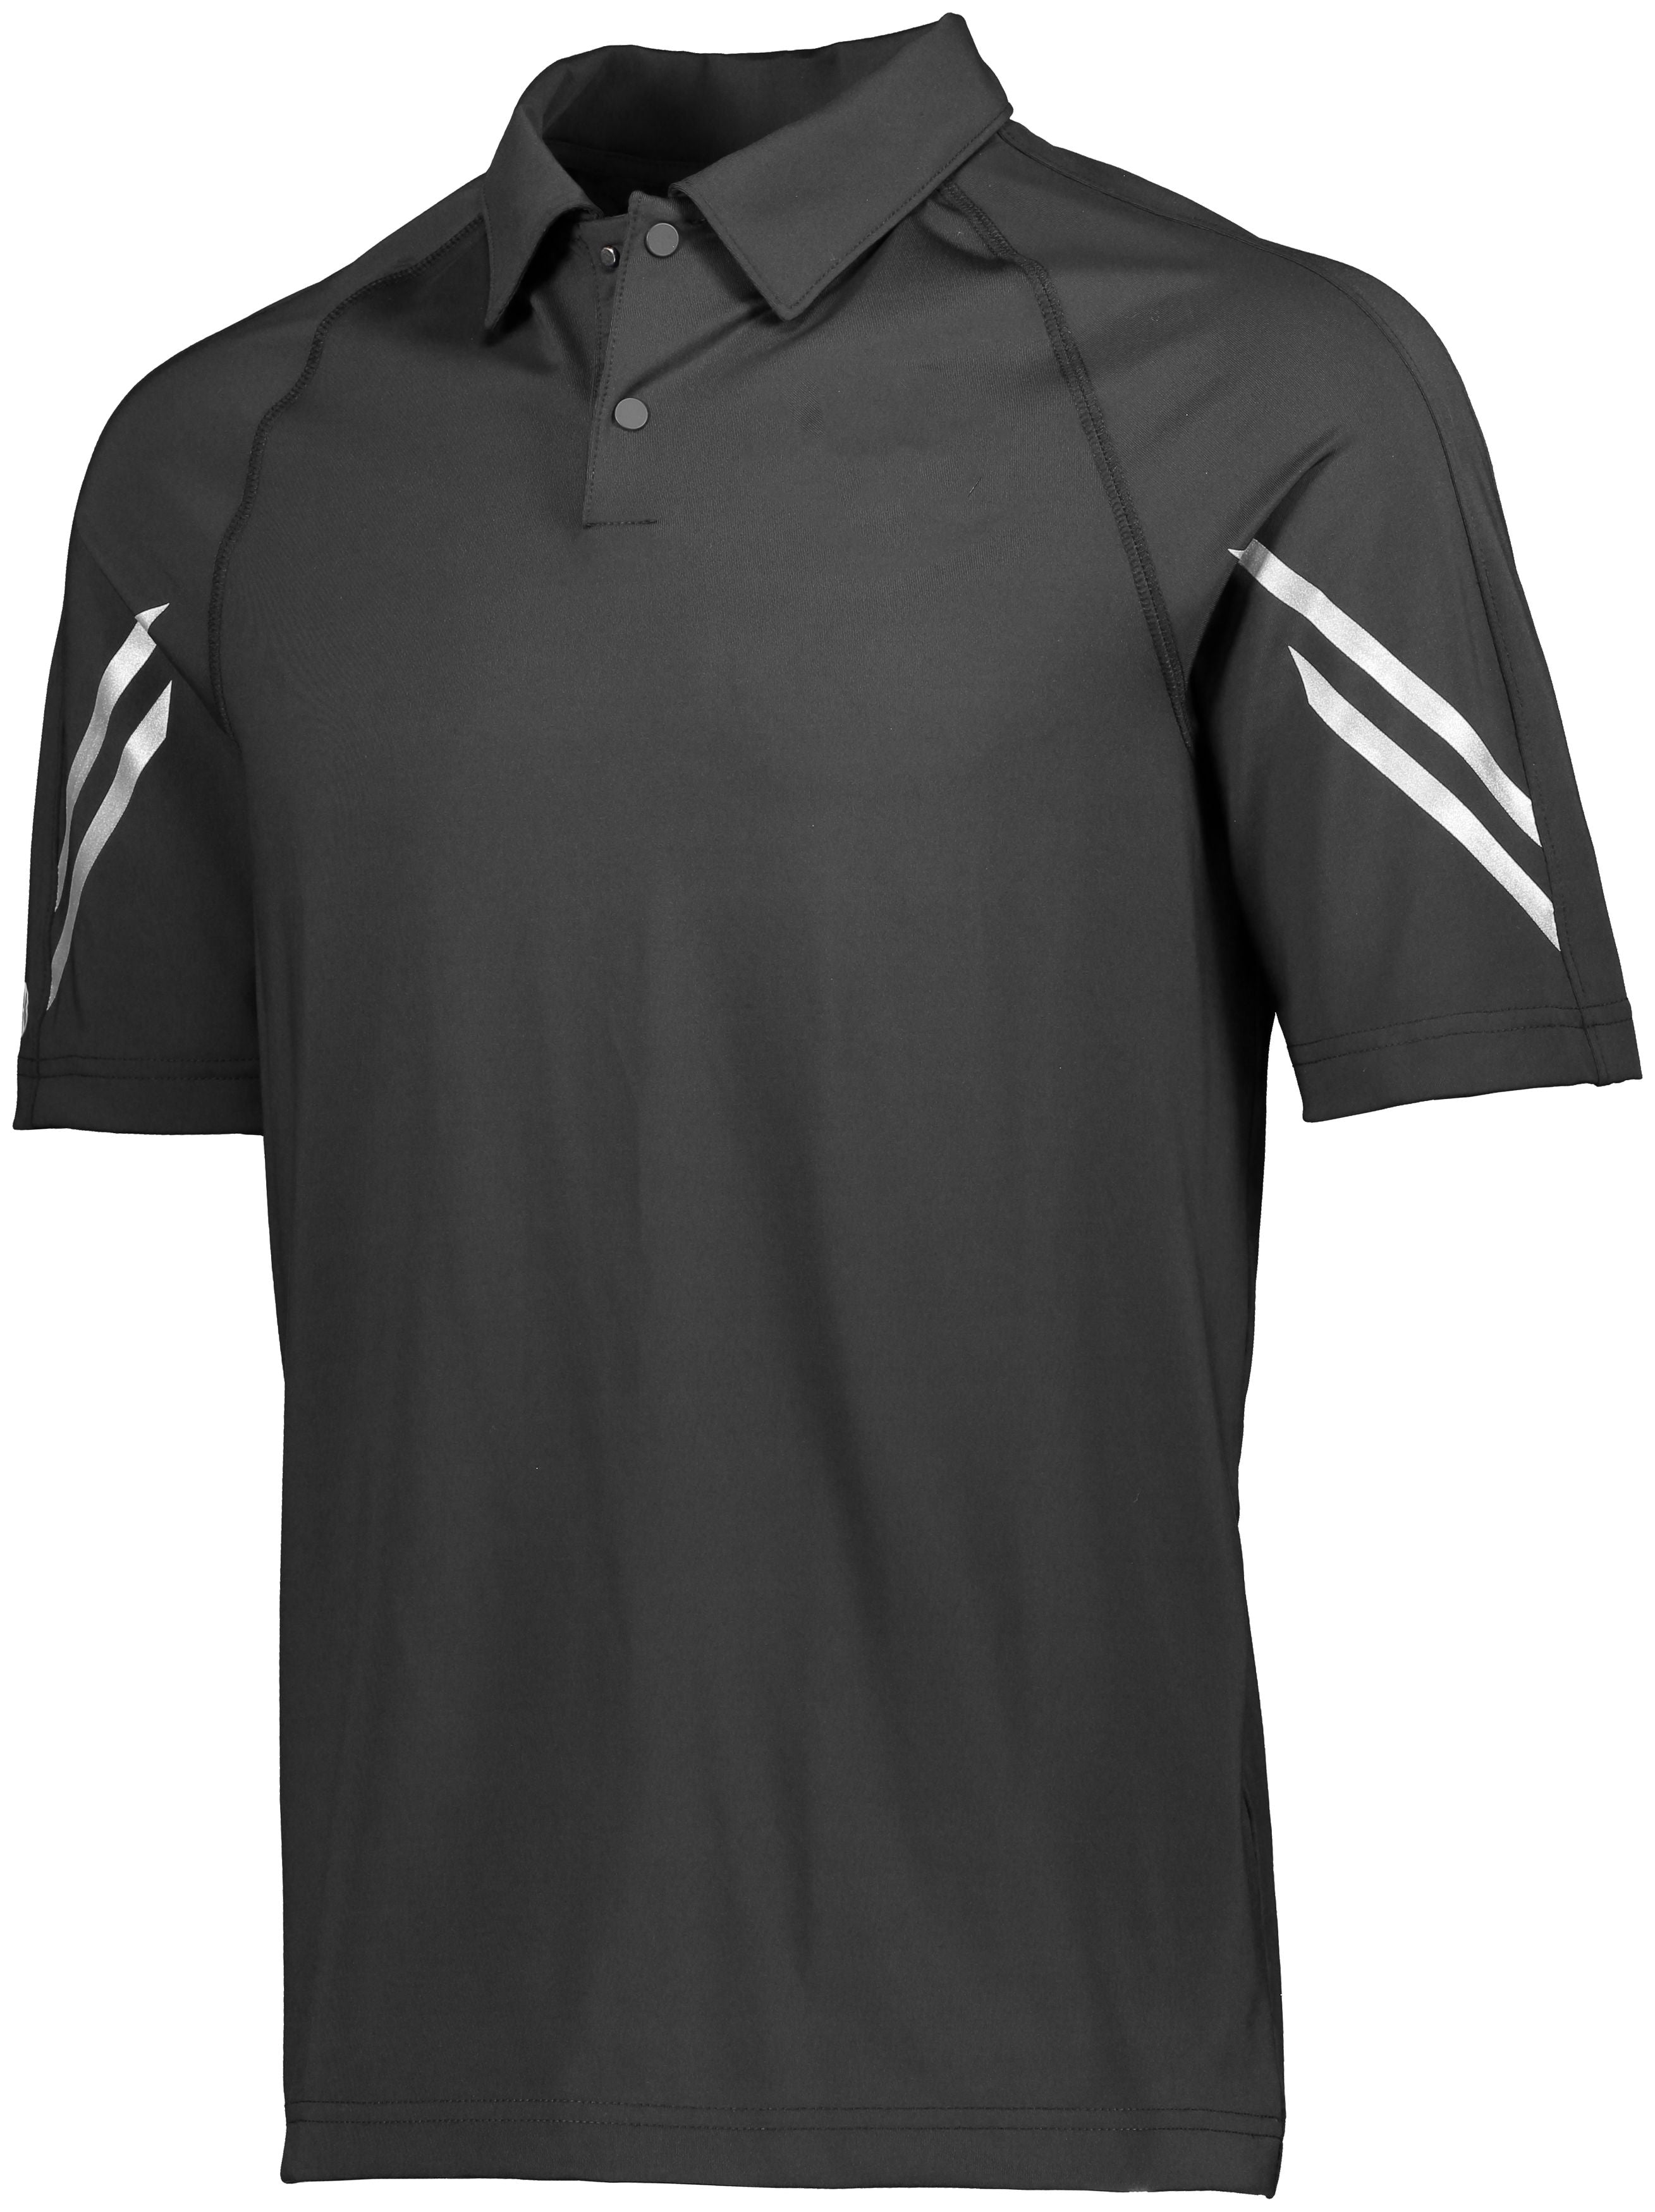 Holloway Flux Polo in Carbon  -Part of the Adult, Adult-Polos, Polos, Holloway, Shirts, Flux-Collection, Corporate-Collection product lines at KanaleyCreations.com